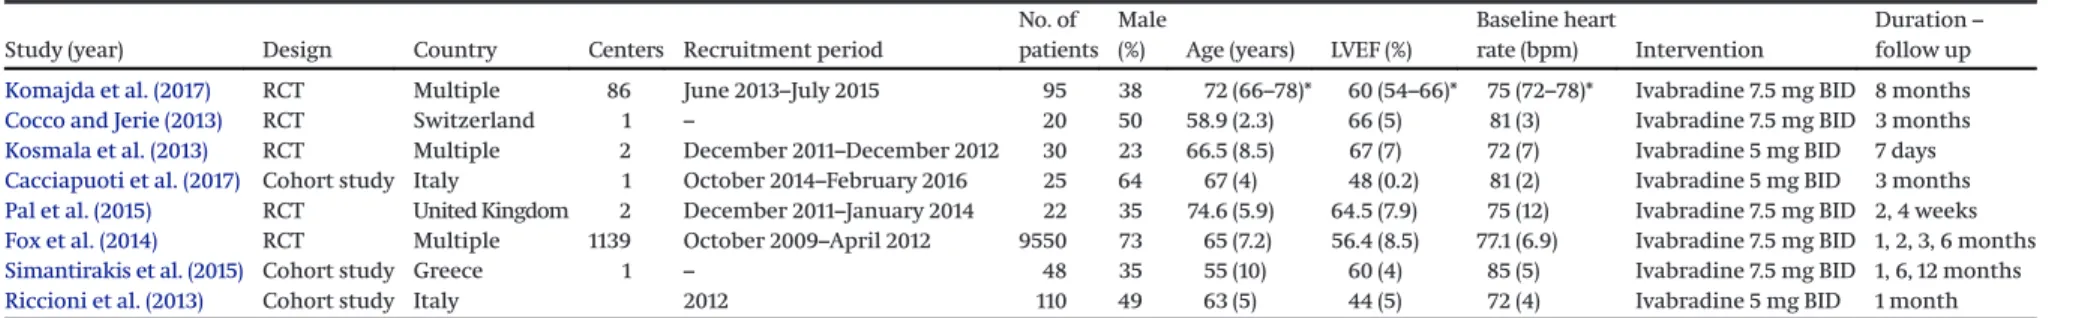 Table 2. Baseline characteristics of the included studies and populations in HFpEF group.